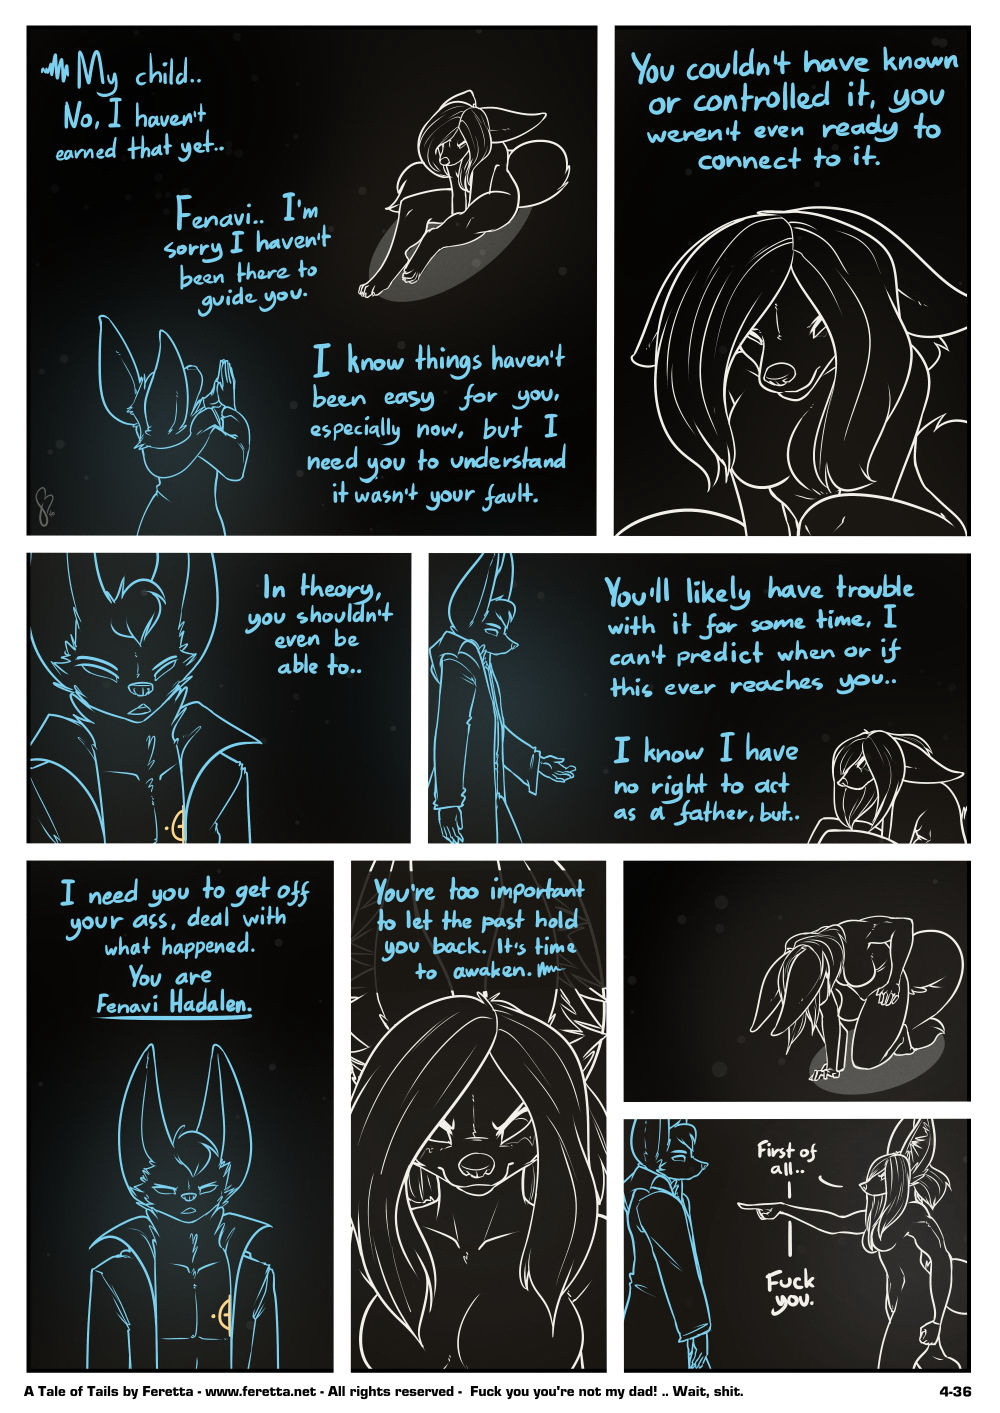 A Tale of Tails 4 - Matters of the mind - Page 36